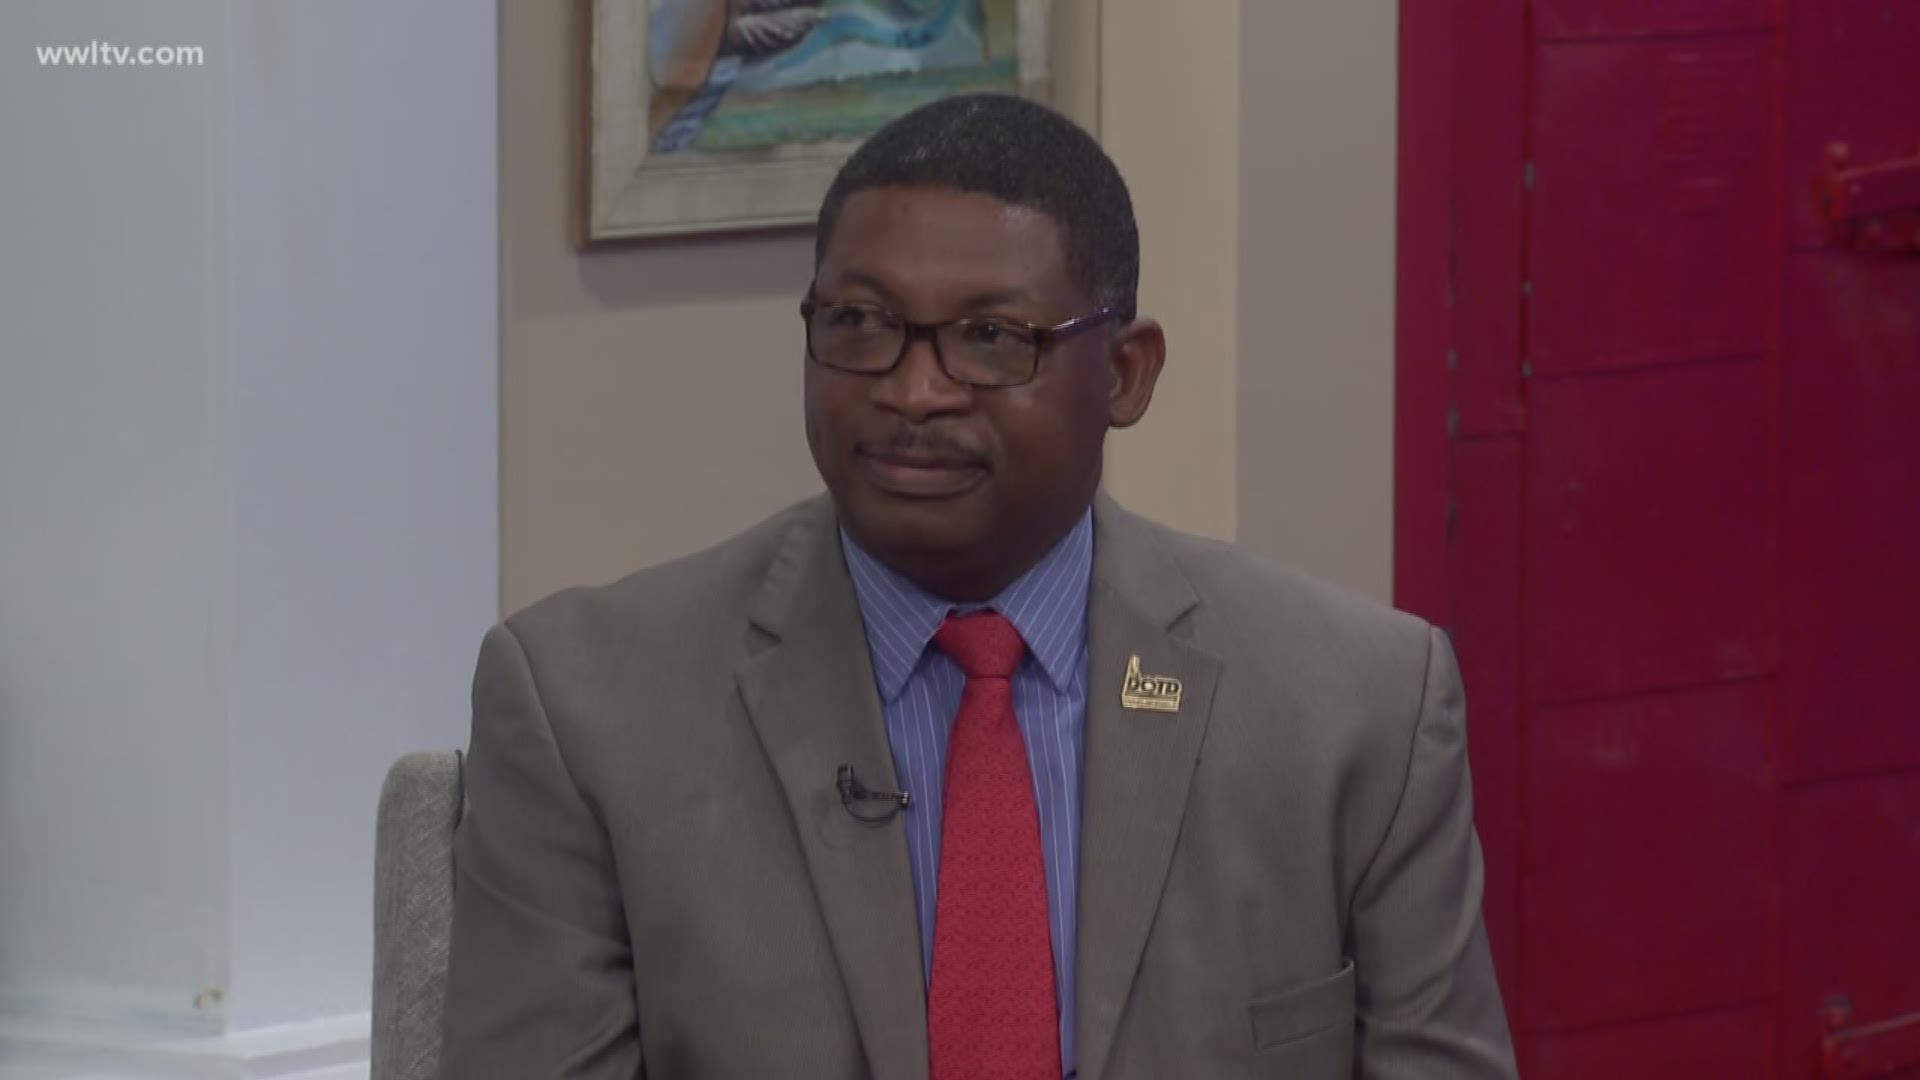 Louisiana Department of Transportation and Development Secretary, Dr. Shawn Wilson, is in studio breaking down the latest construction projects around the city.